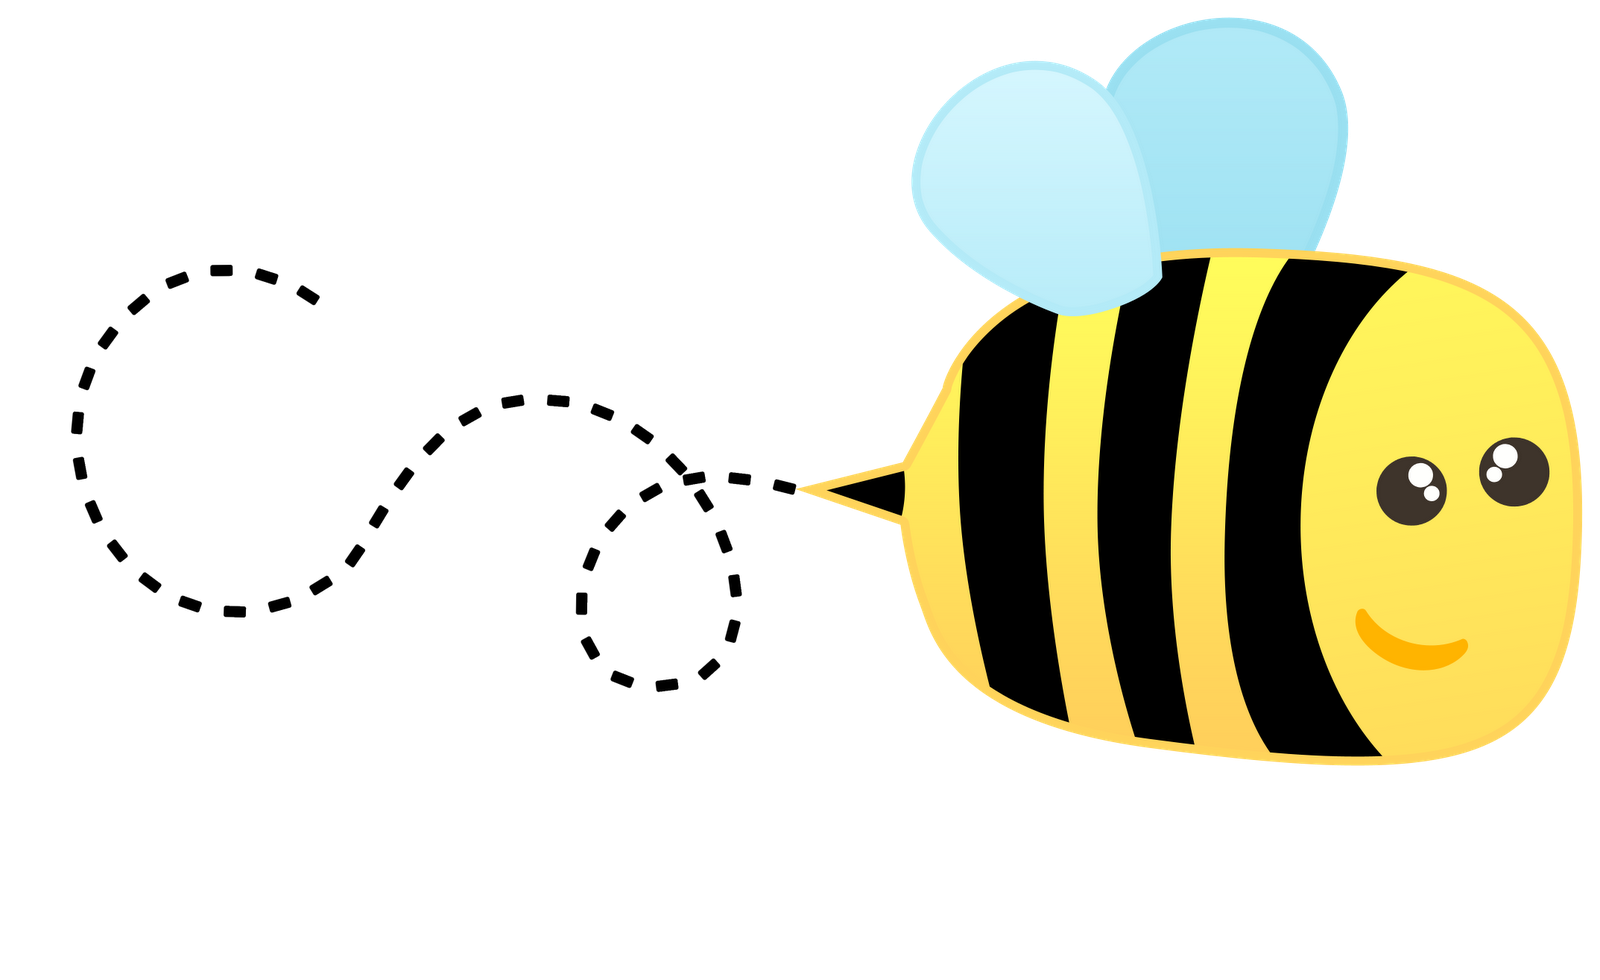 Bumble bee clip art free vector in open office drawing svg svg 3